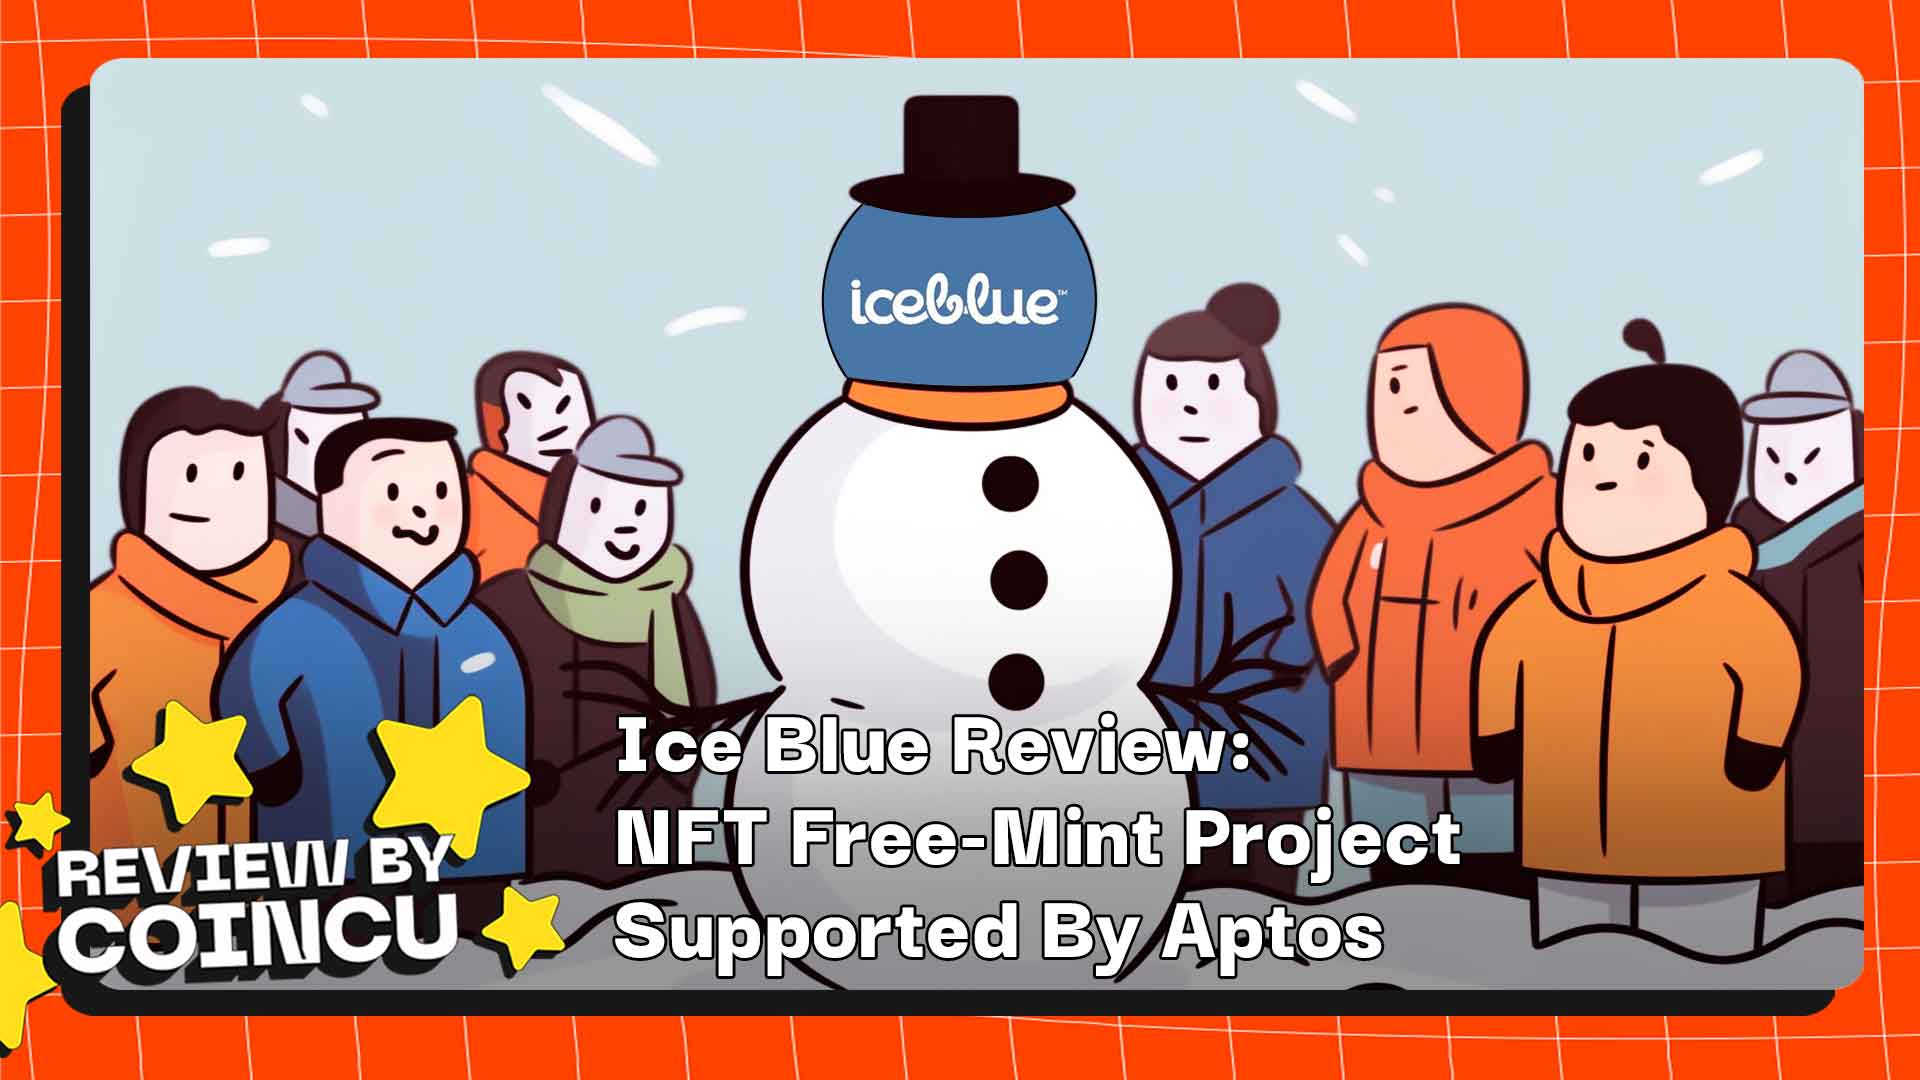 Ice Blue Review: NFT Free-Mint Project Supported By Aptos